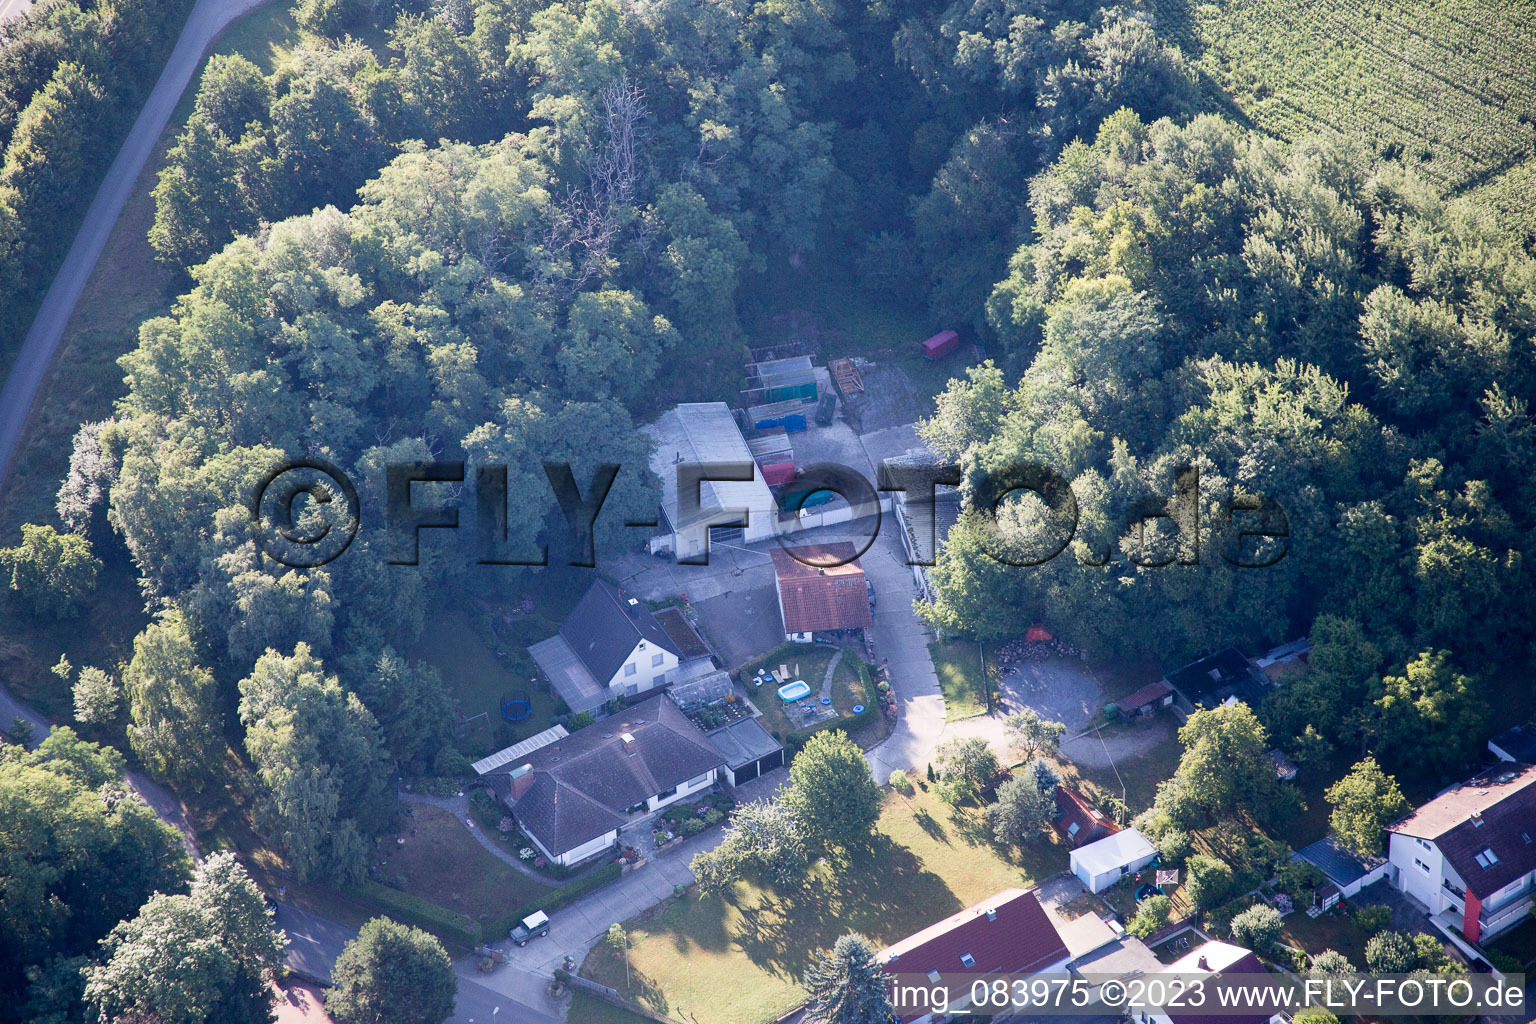 Drone image of Hohenwettersbacherstraße 38, "open youth workshop Karlsruhe" at the quarry in the district Grünwettersbach in Karlsruhe in the state Baden-Wuerttemberg, Germany